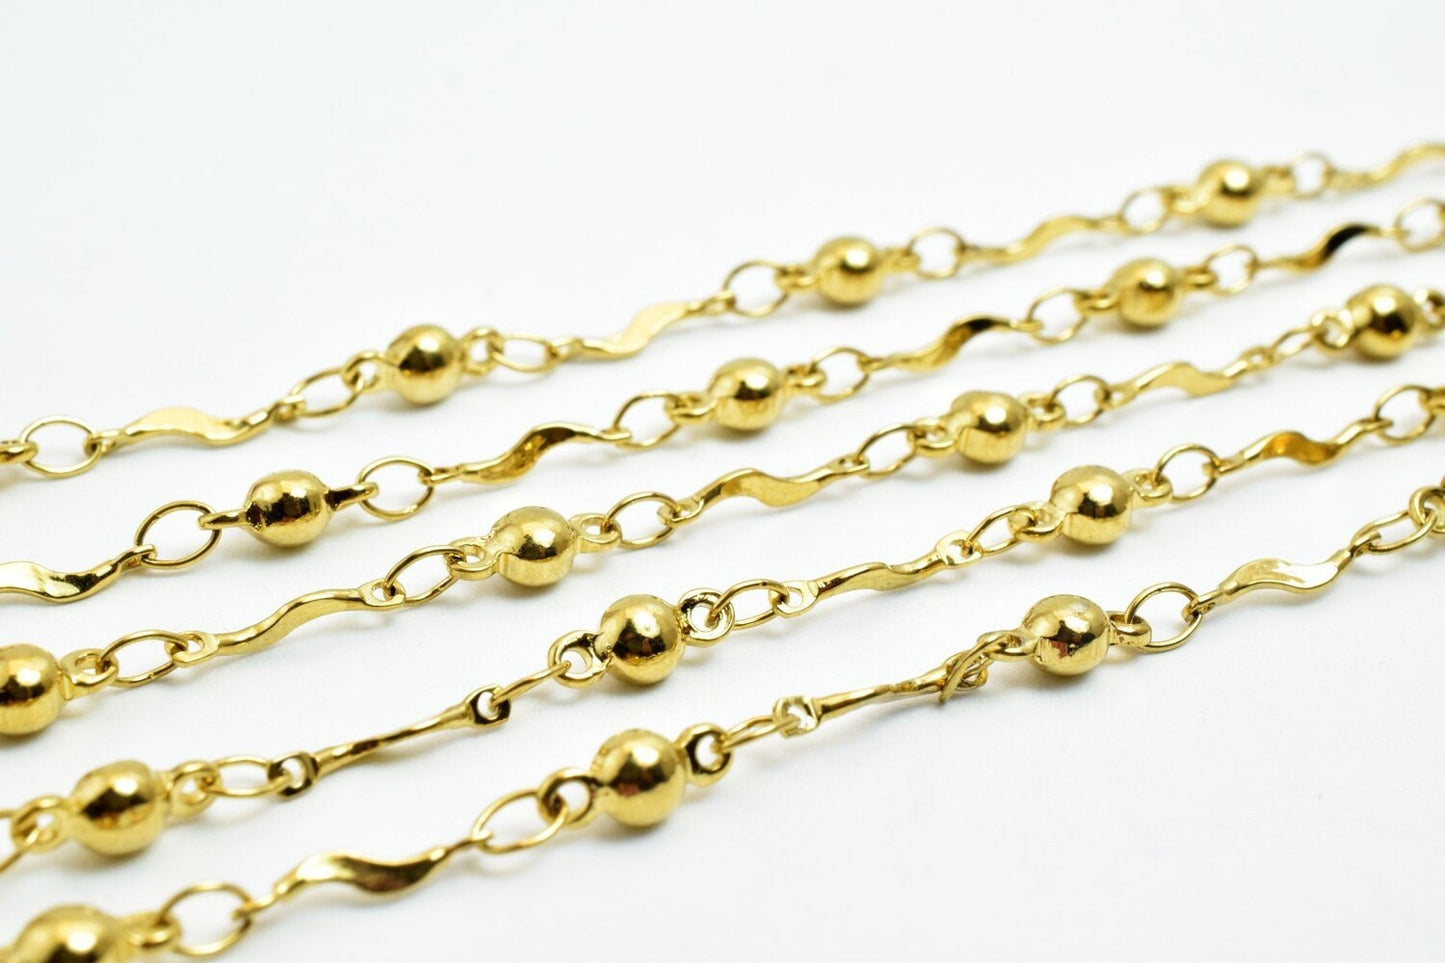 3 Foot 18K Gold Filled Chain, Bar Chain, Satellite Chain, Gold Filled Findings Chain For Jewelry Making GFC070